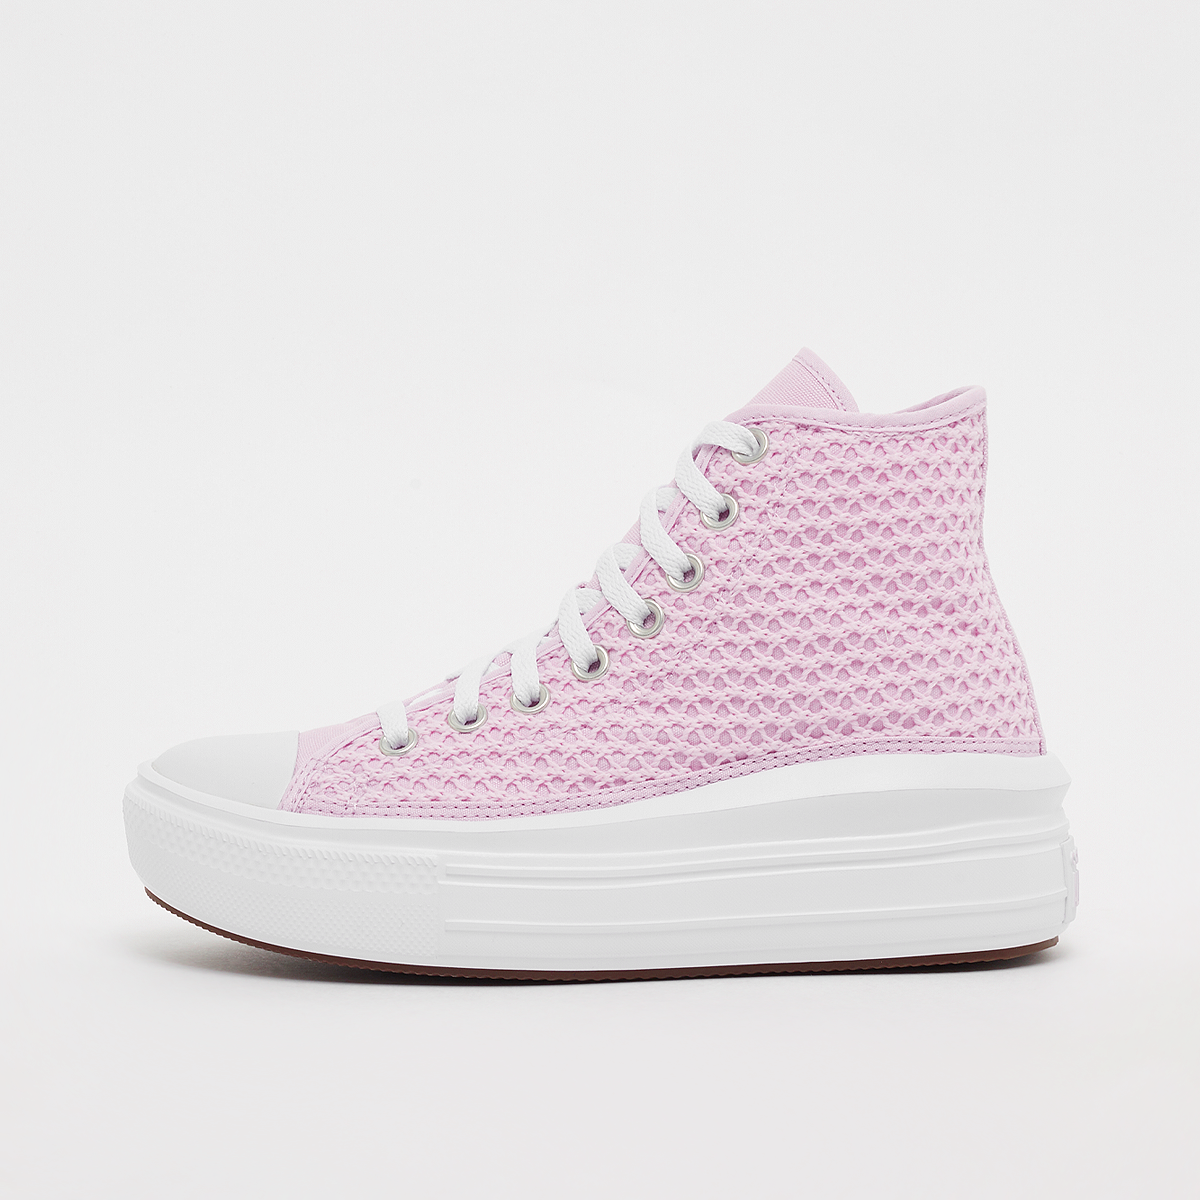 Chuck Taylor All Star Move stardust lilac/stardust lilac, Converse, Footwear, stardust lilac/stardust lilac, taille: 36